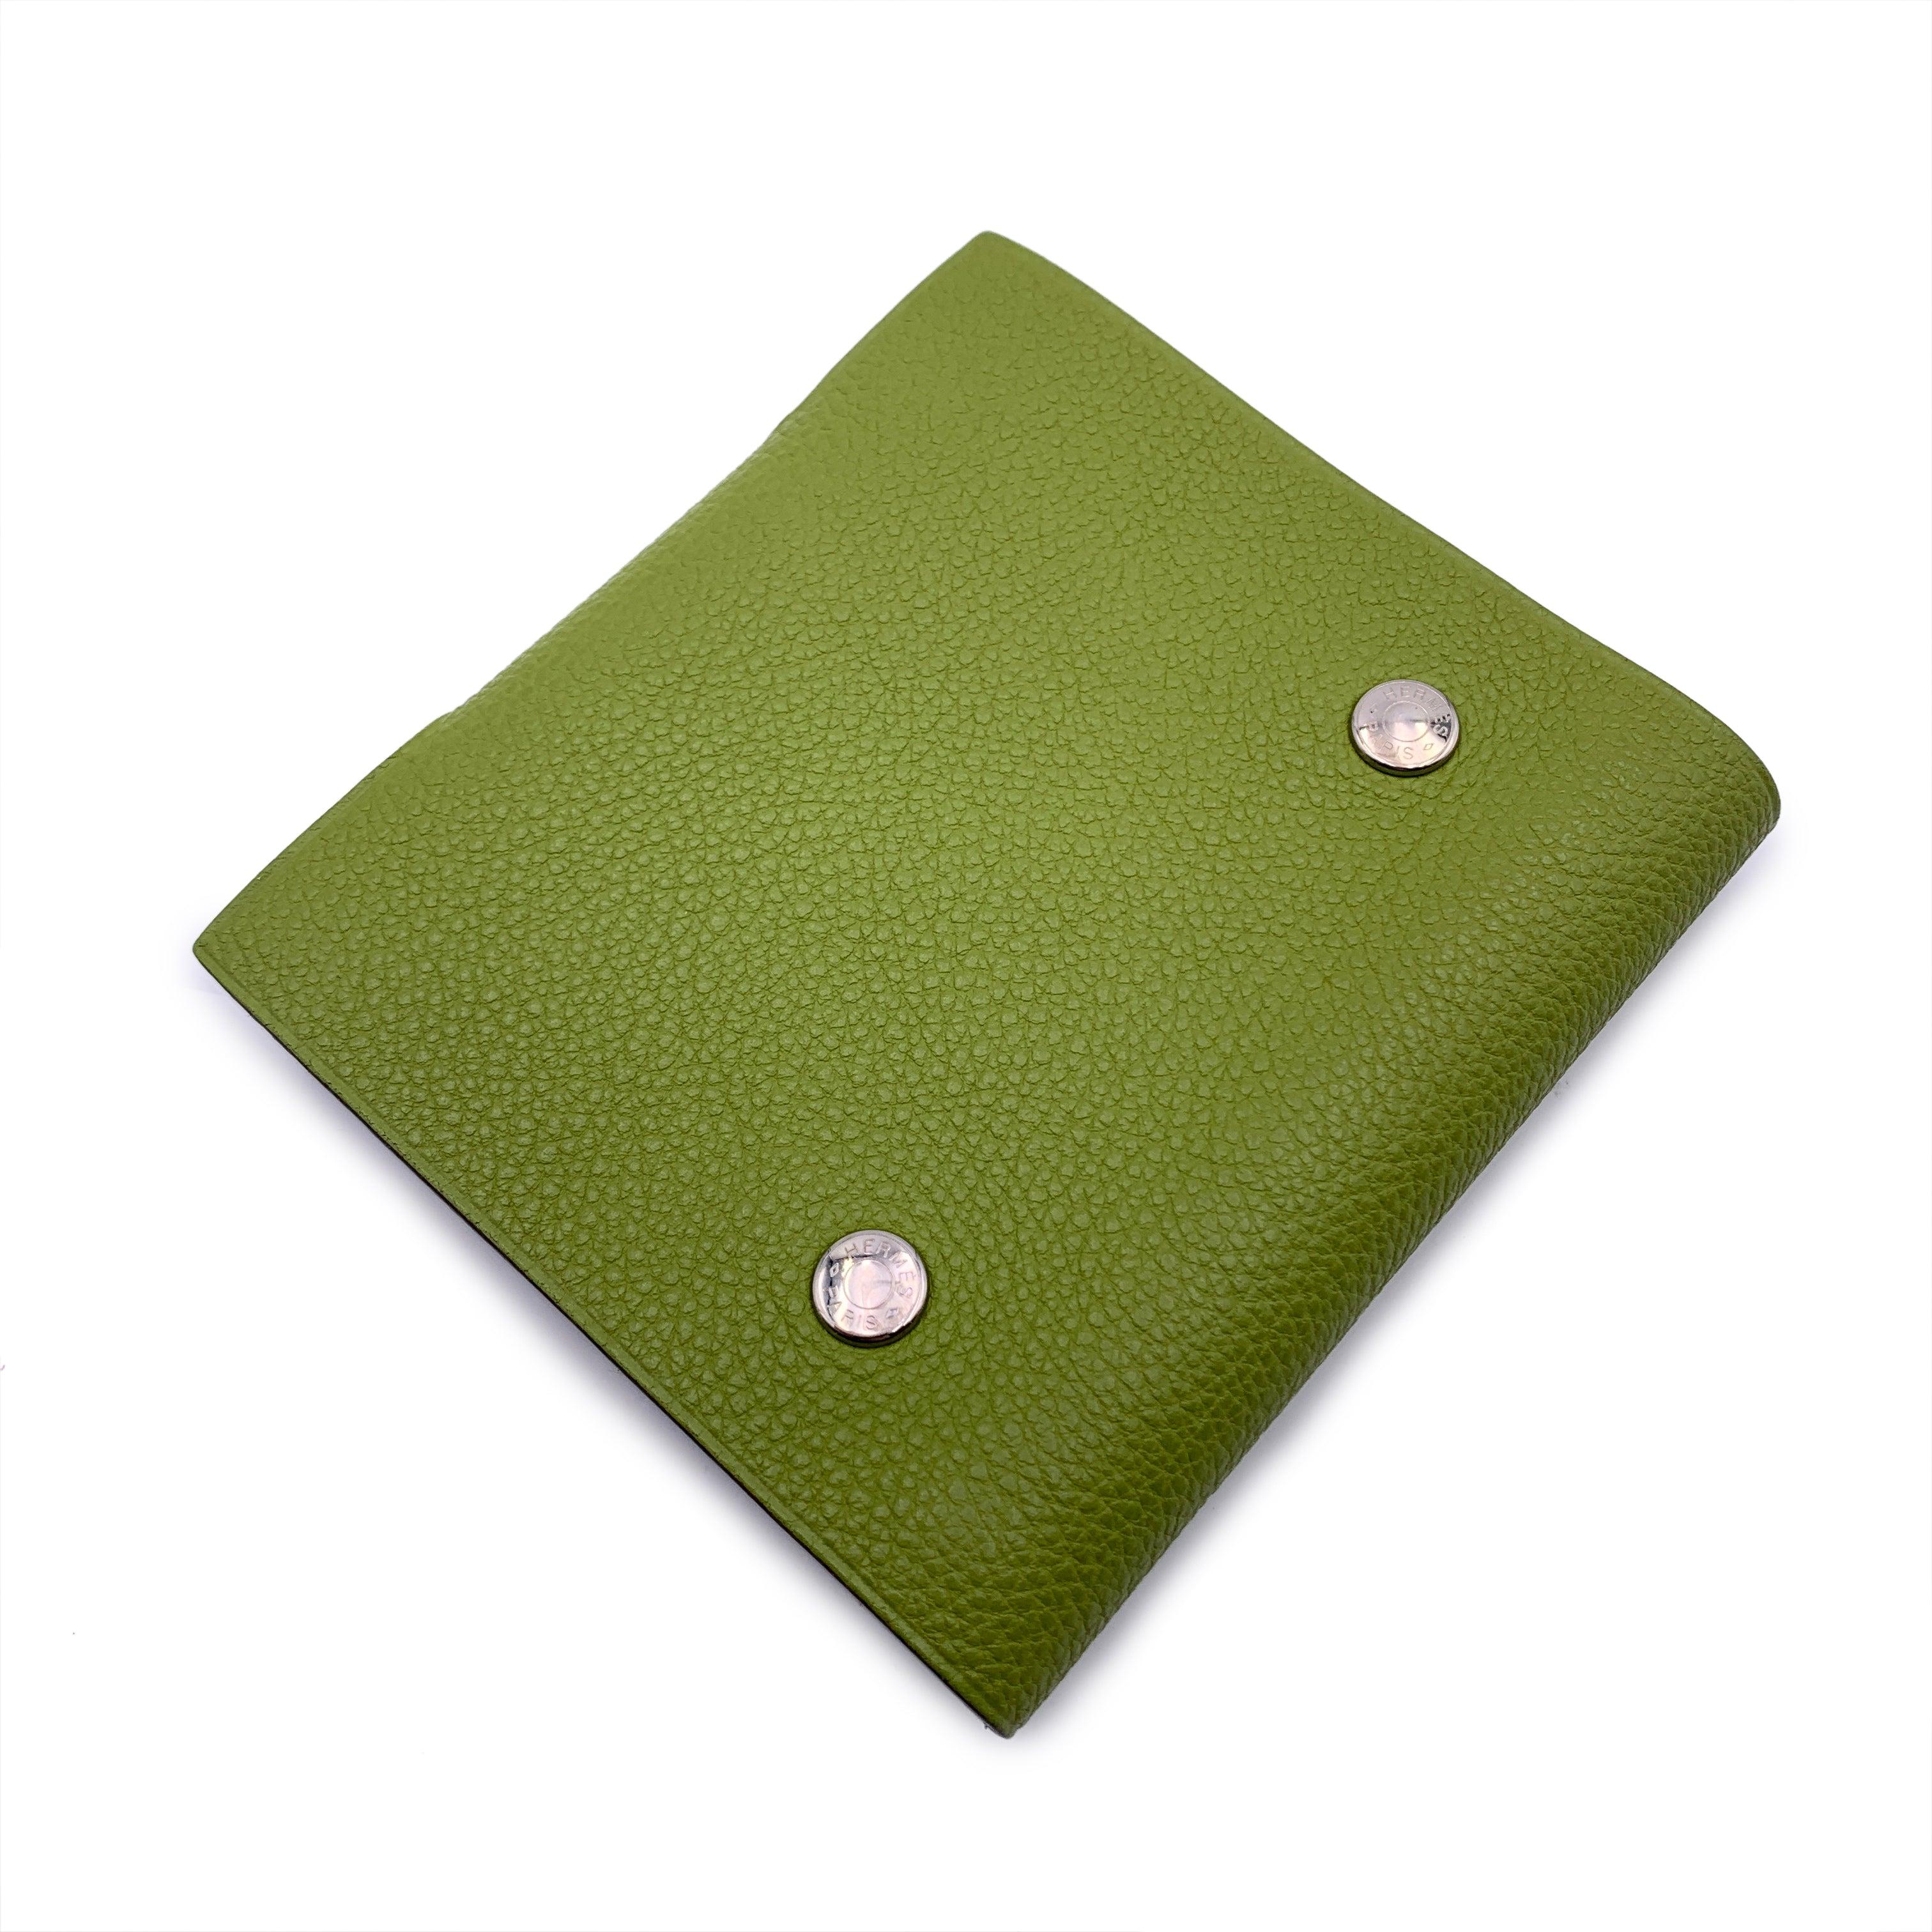 Hermès mini ULYSSE notebook cover in green Togo leather, palladium silver tone hardware. The cover opens with a snap to a suede interior. Original Hermes refill included. Logos / Tags: 'HERMES Paris - Made in France' tag inside, embossed data code